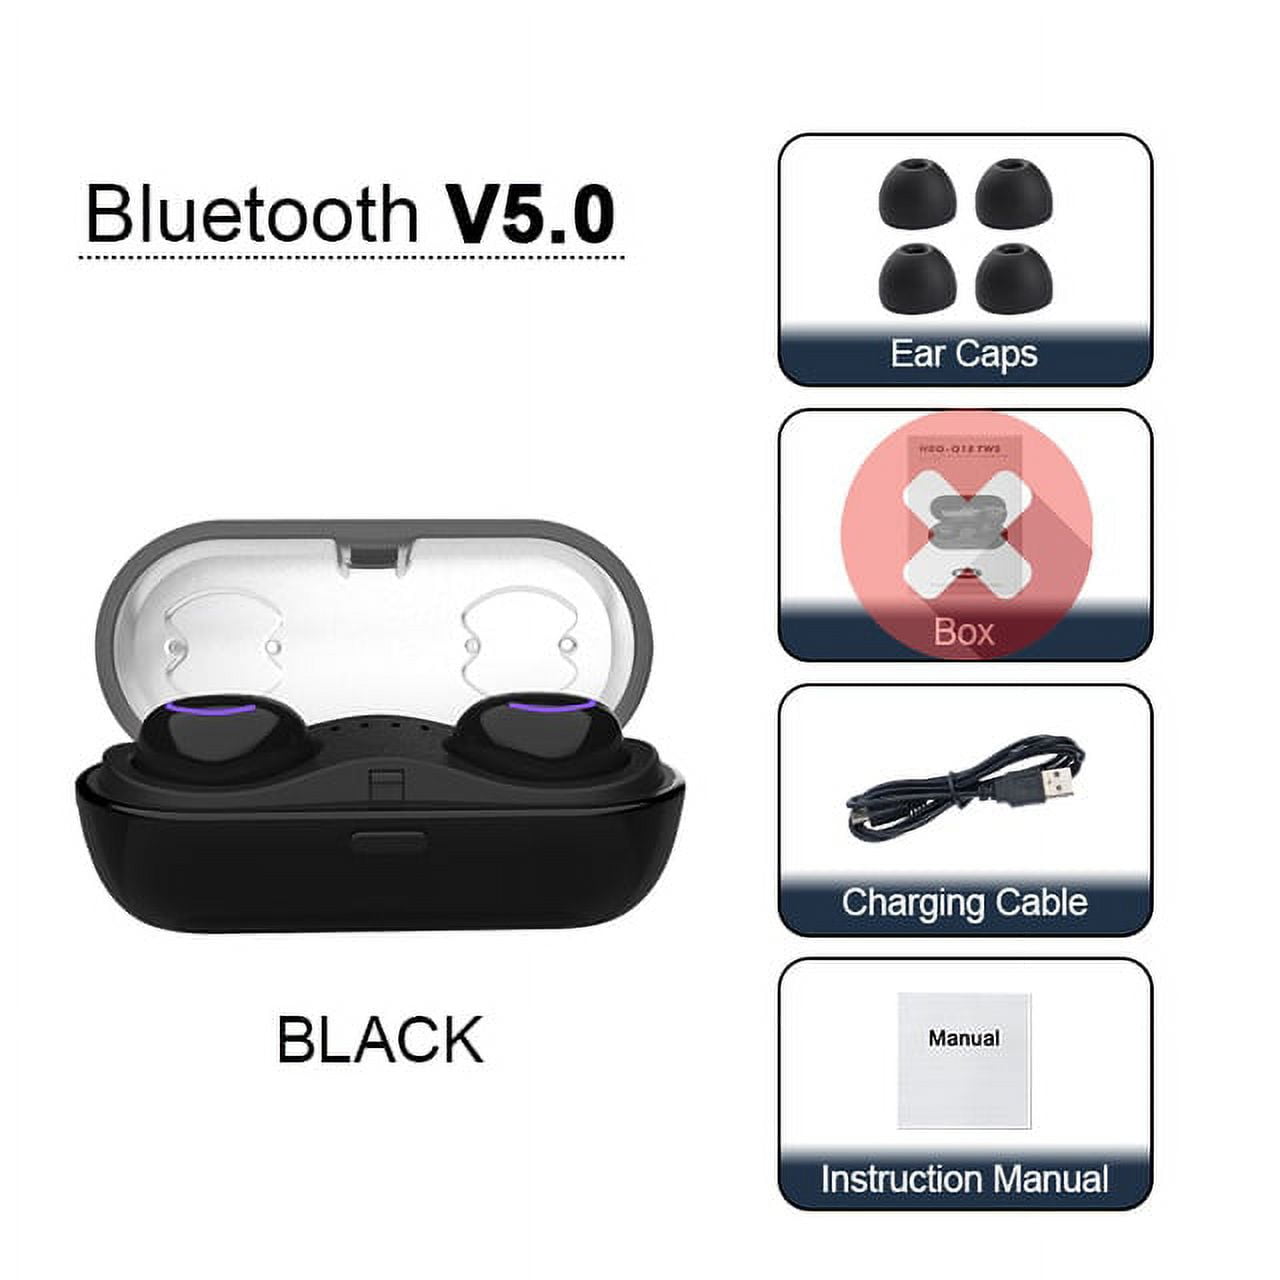 BT313 Bluetooth Earphones Sport Wireless Headphone Handsfree Bluetooth  Earbuds Bass Headsets with Mic for iphone for xiaomi